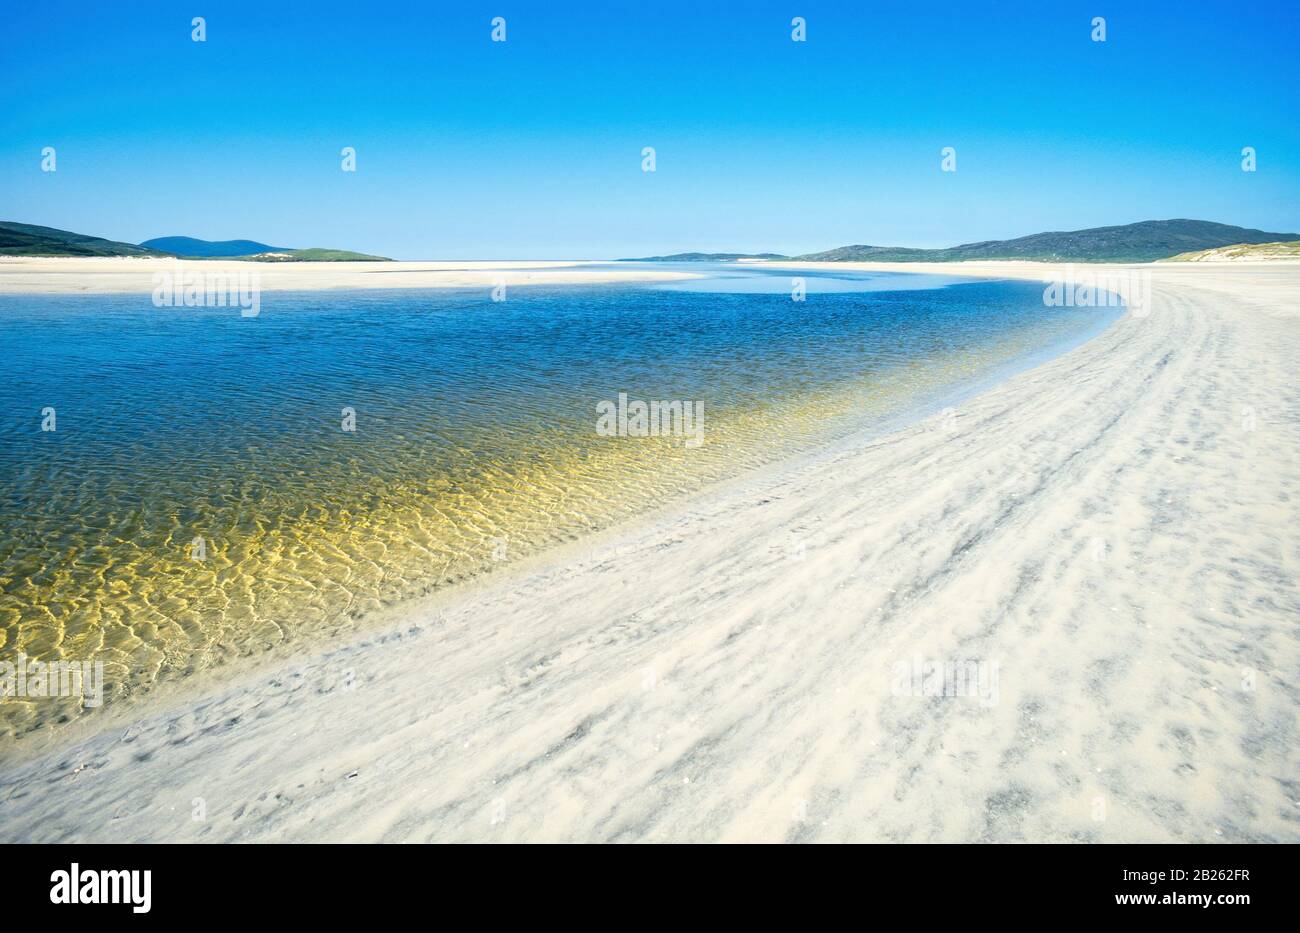 Sunlit sands and water at Luskentyre (Losgaintir) Beach on a beautiful Summer day in June with blue sky, Isle of Harris, Scotland, UK Stock Photo